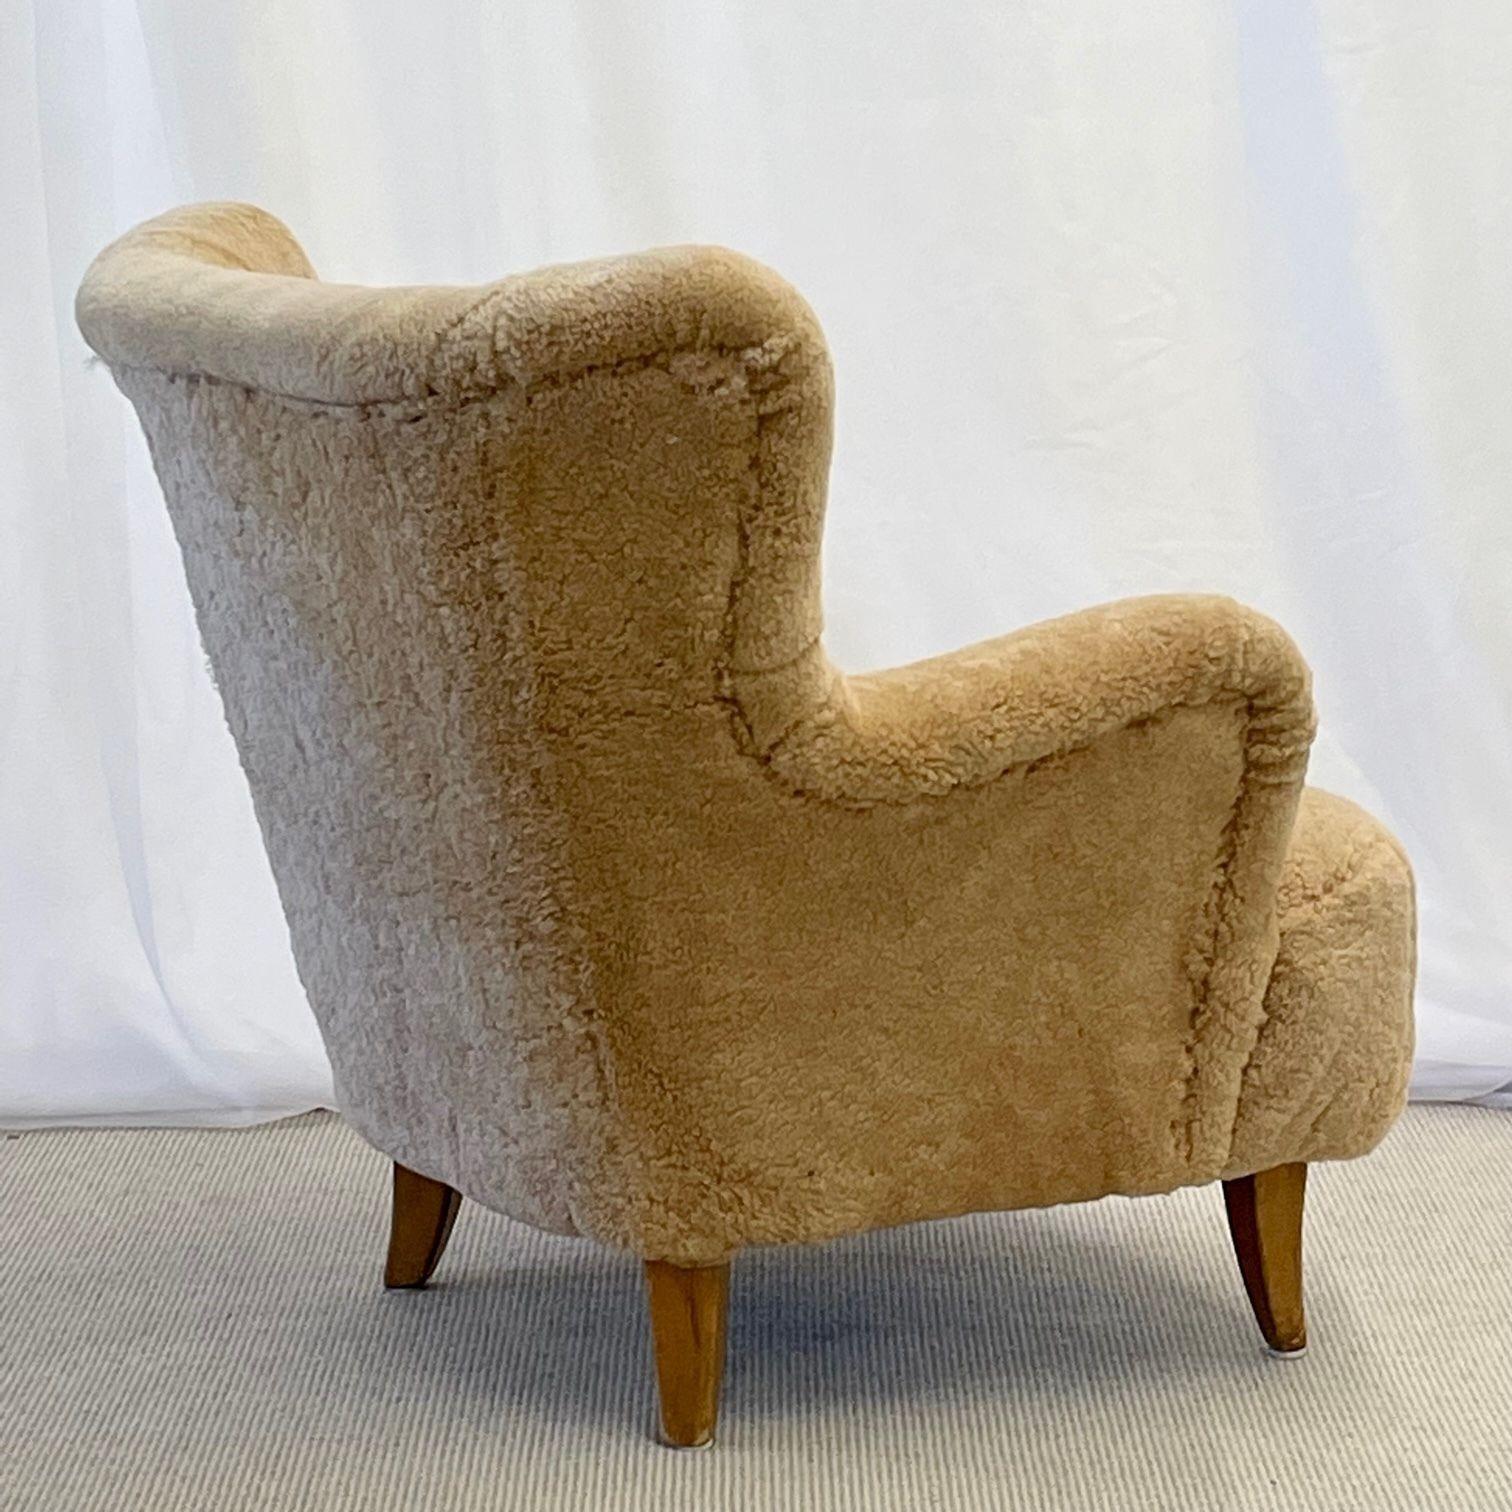 Sheepskin Pair of Mid-Century Modern Danish Cabinet Maker Lounge, Club or Wingback Chairs